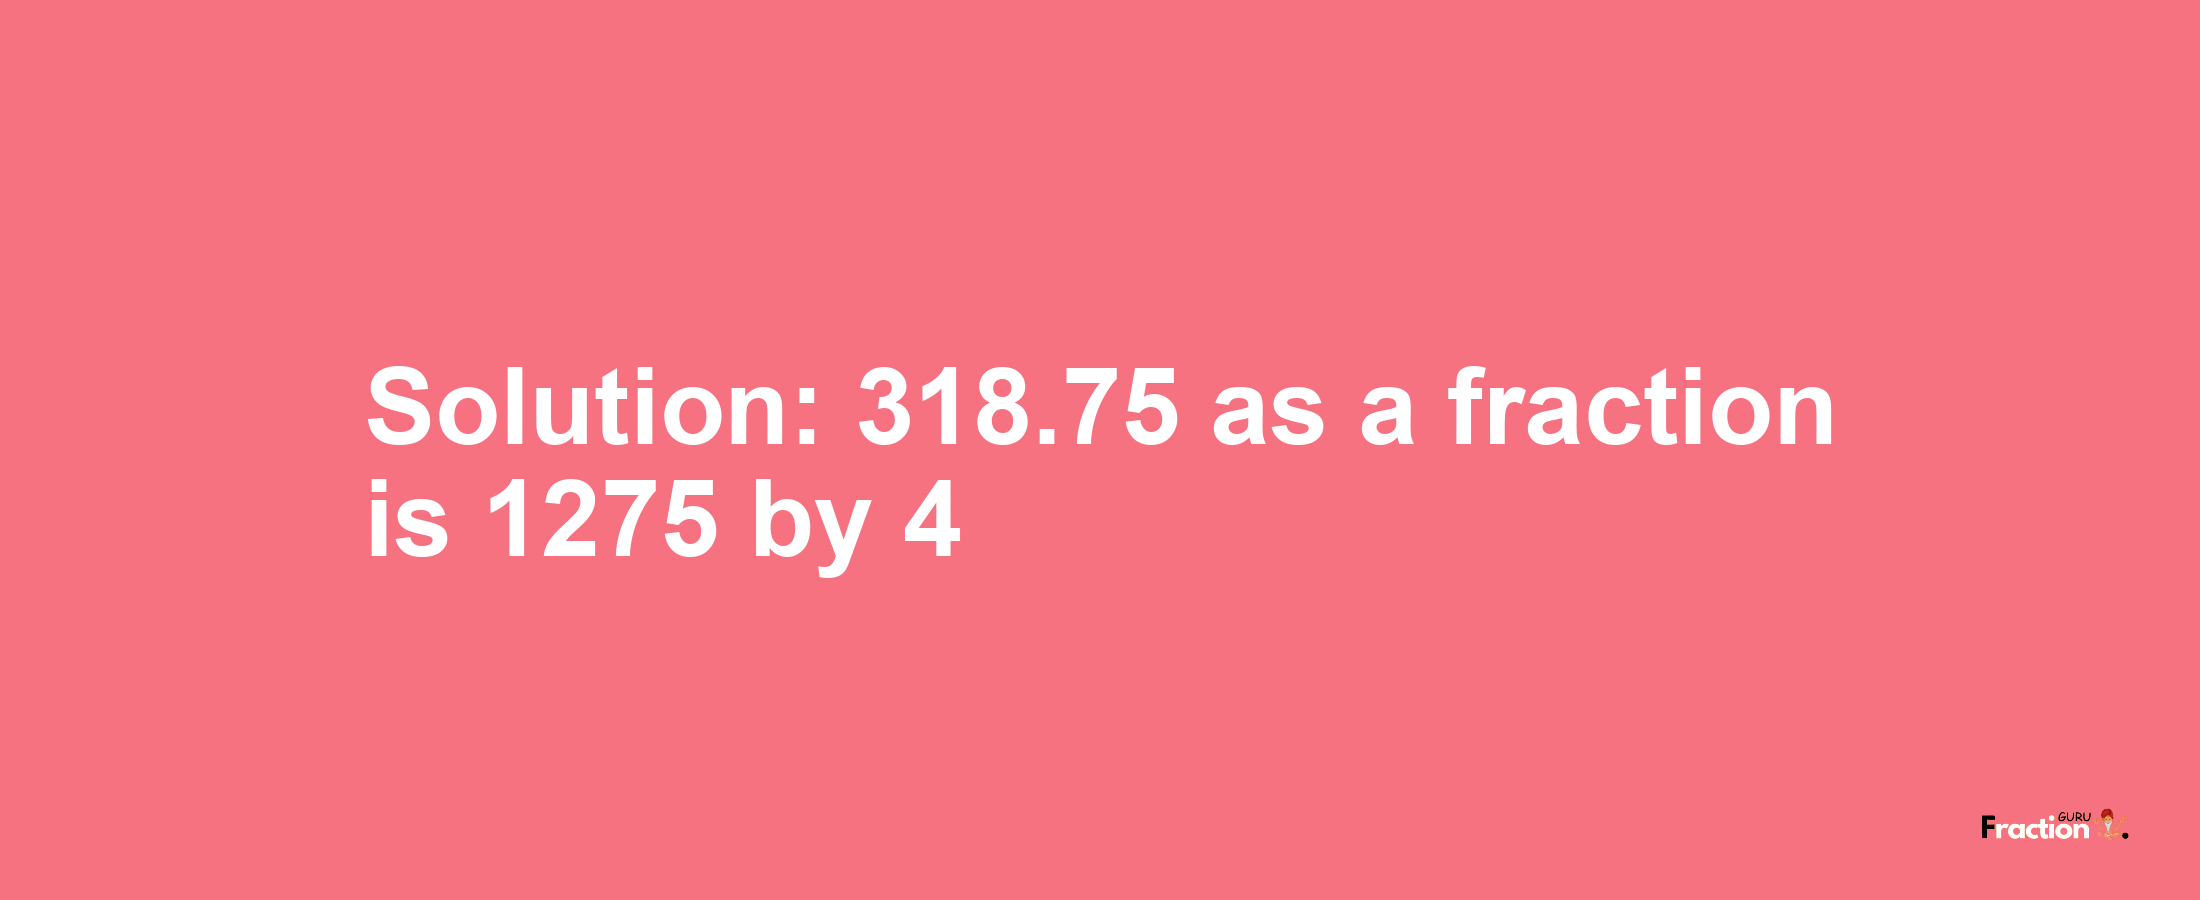 Solution:318.75 as a fraction is 1275/4